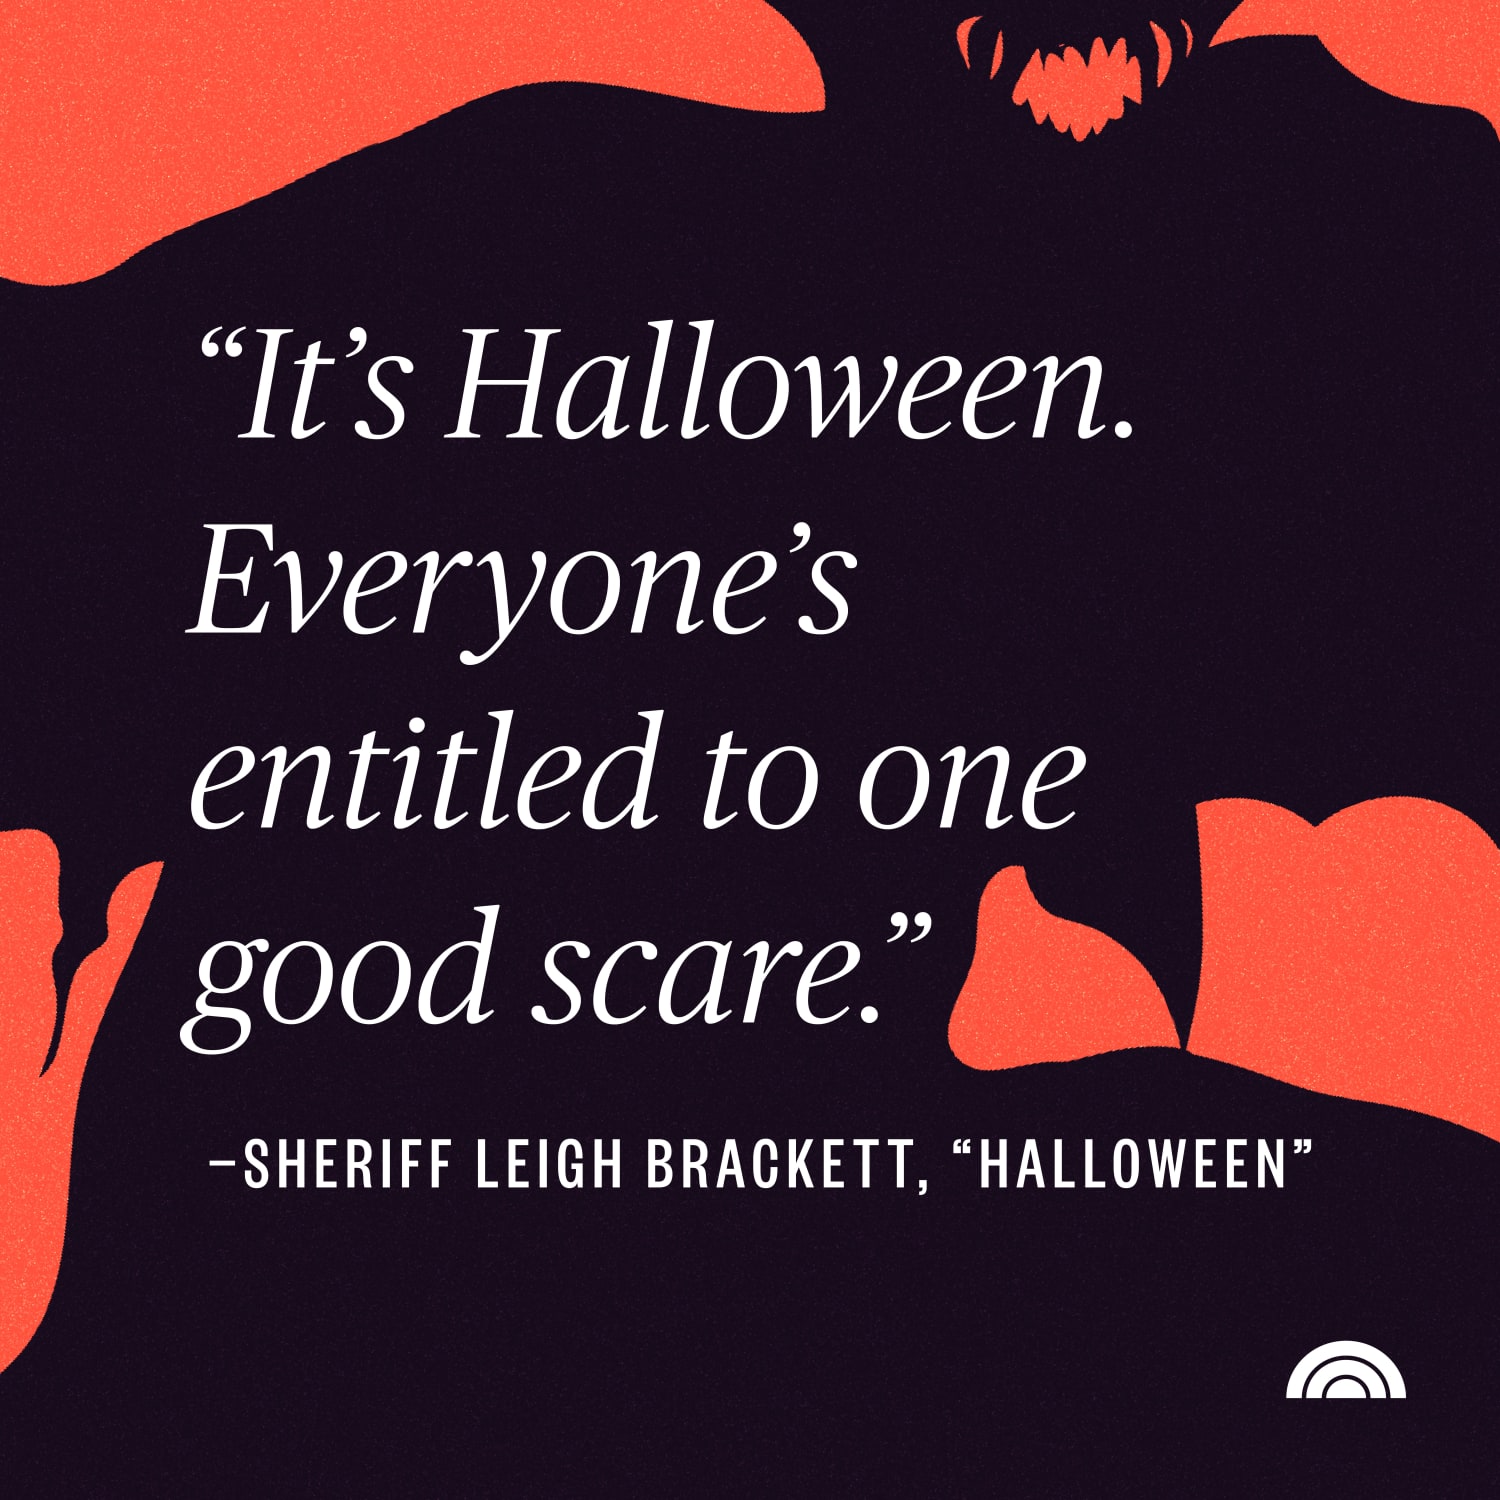 75 Best Halloween Quotes - Short Halloween Quotes From Movies